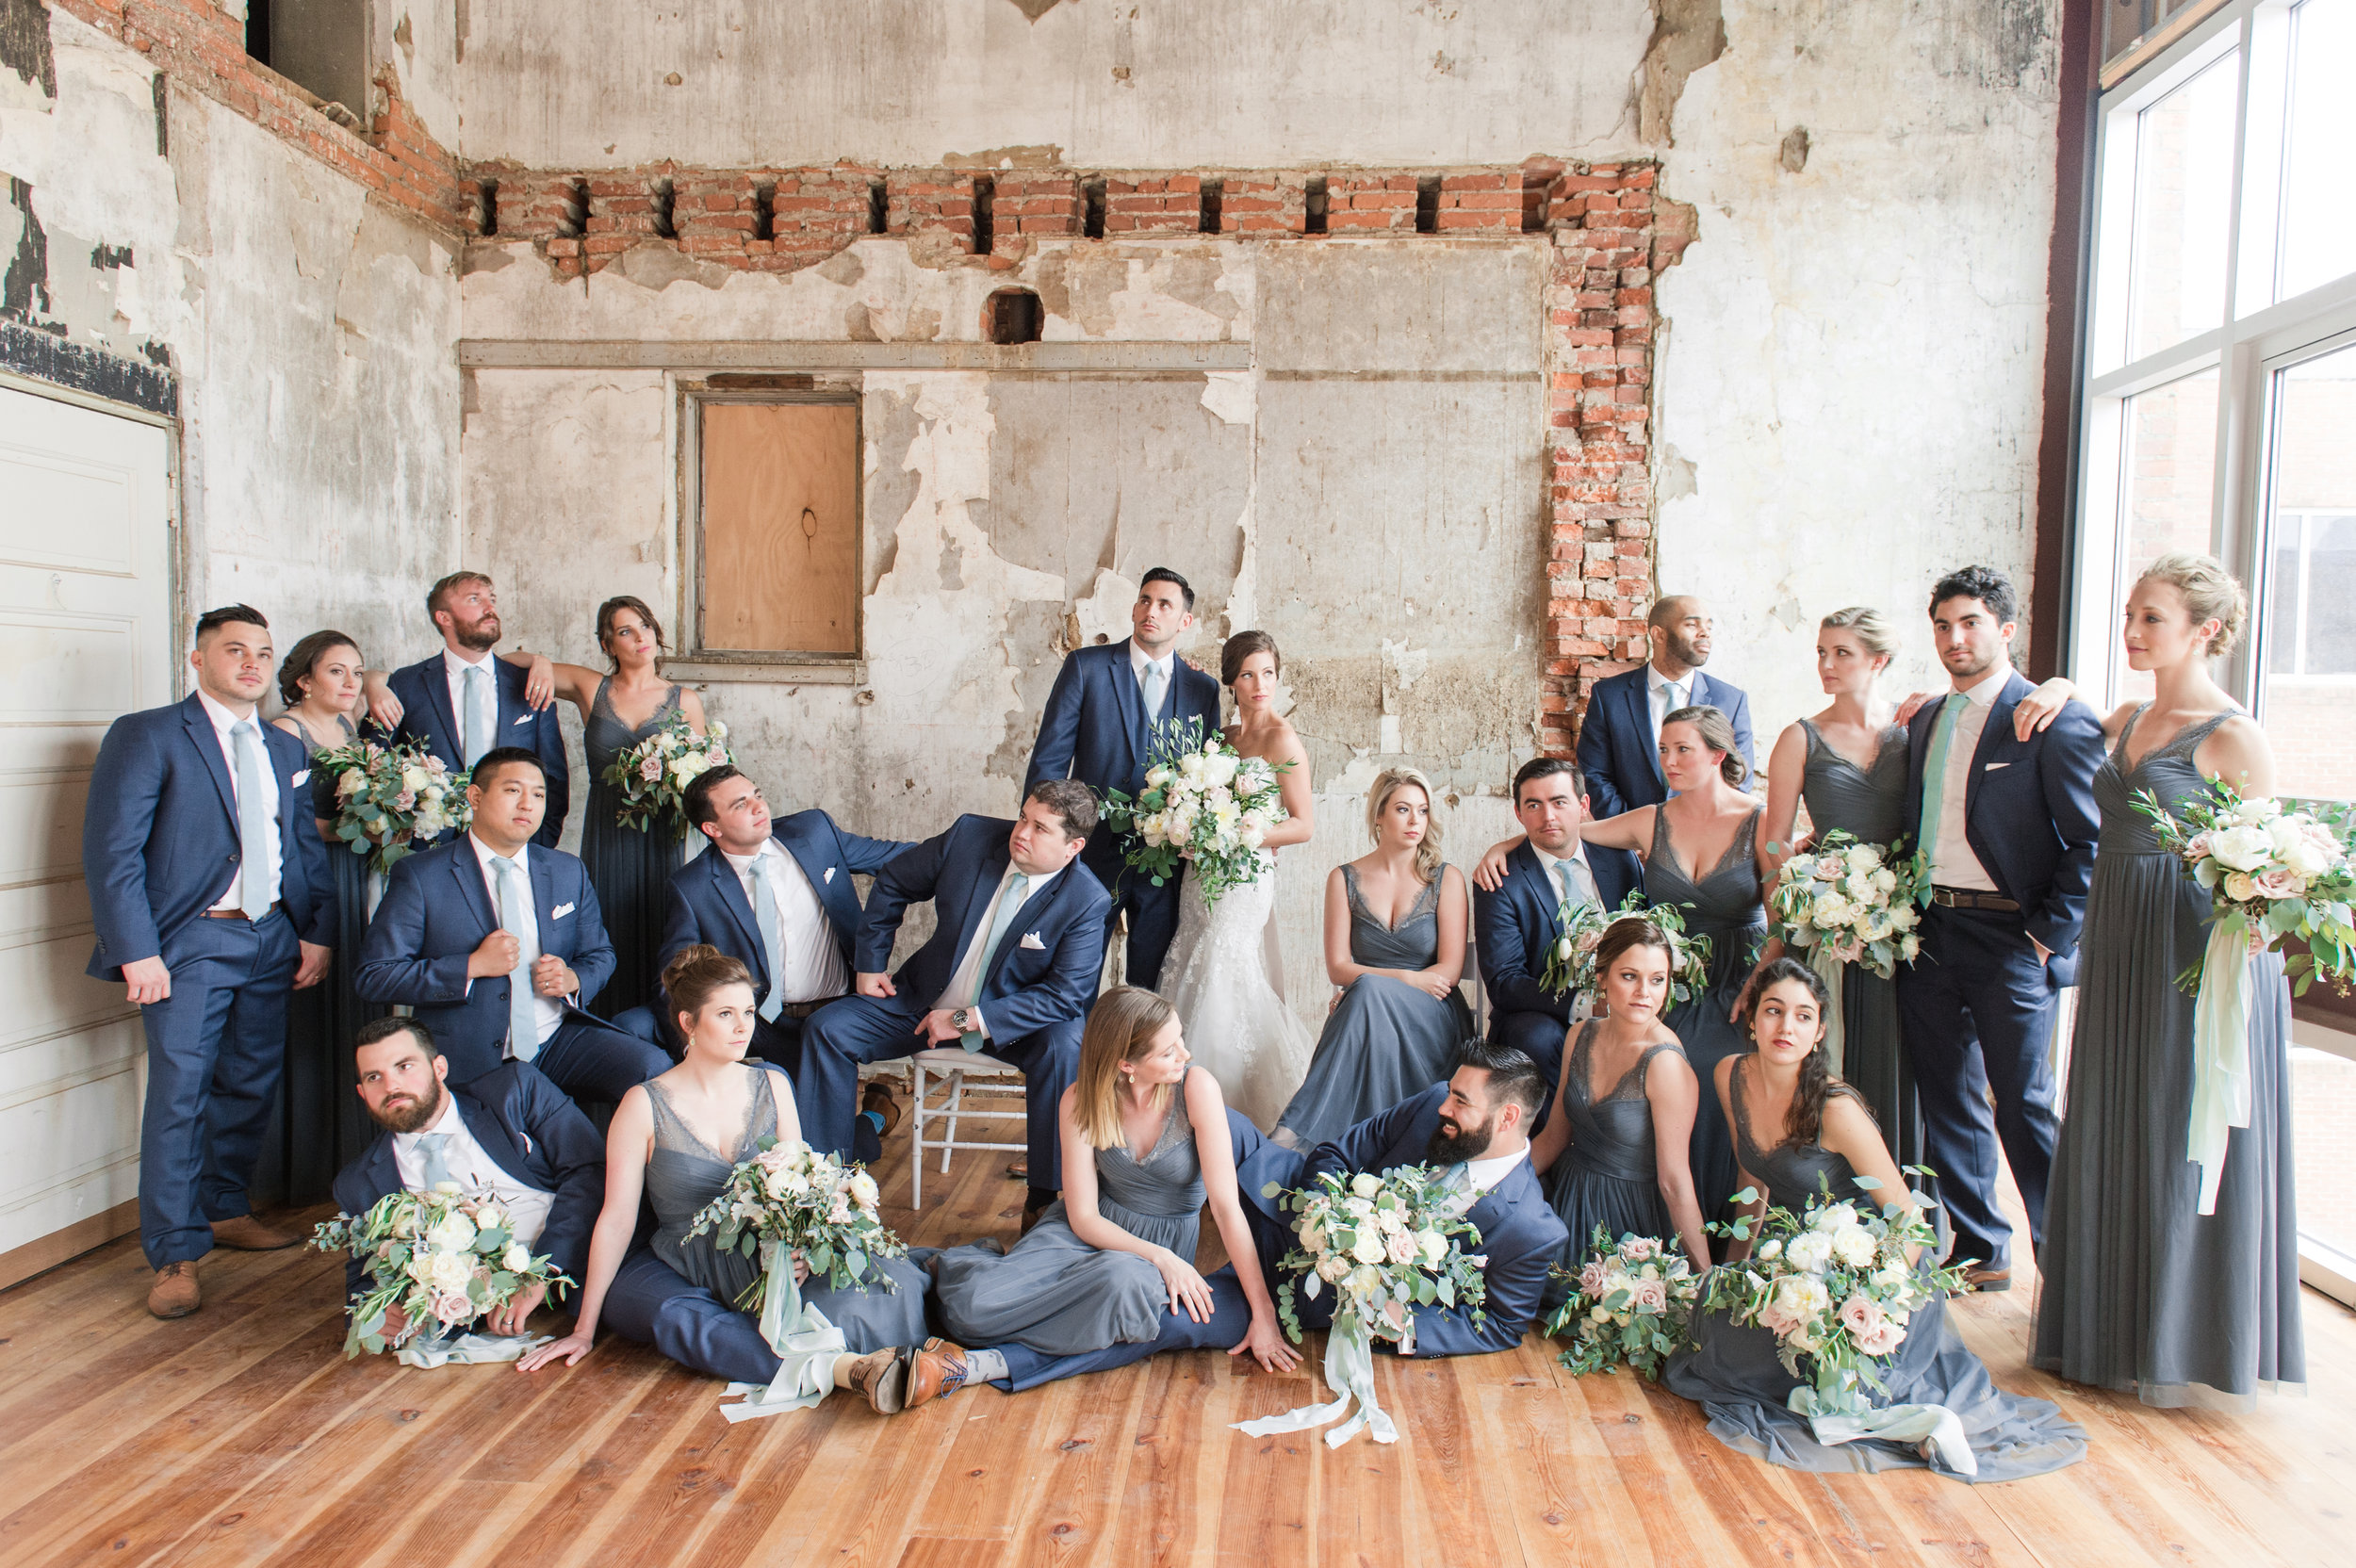 Bridal party in historic rustic room